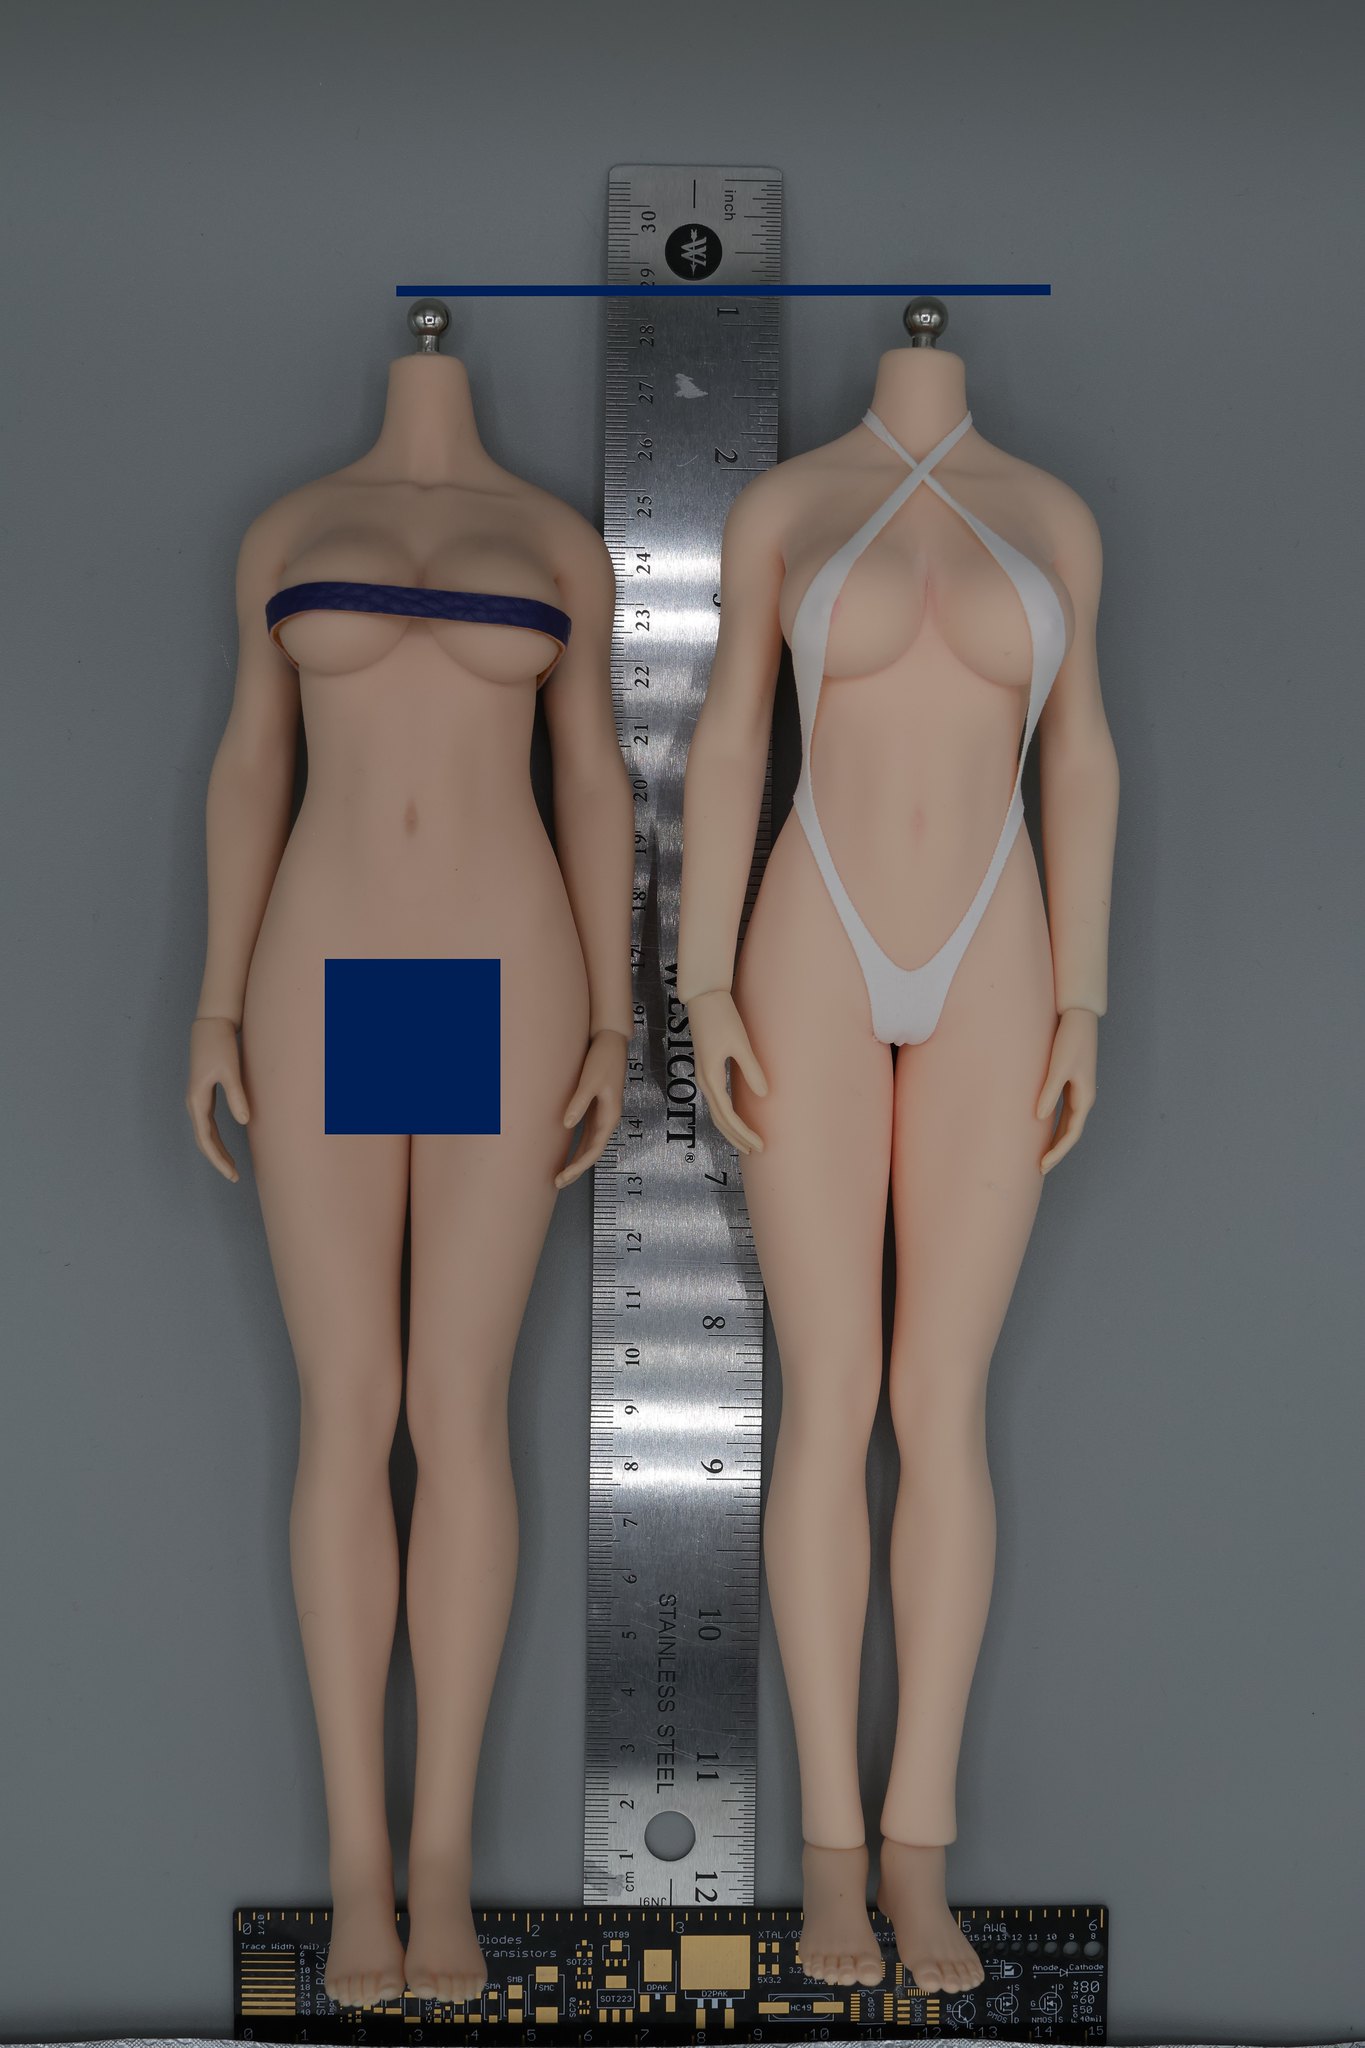 body - TBLeague / Phicen Seamless Bodies with Steel Skeleton Catalog (updated continually) - Page 8 53438304455_2dac0a117c_k